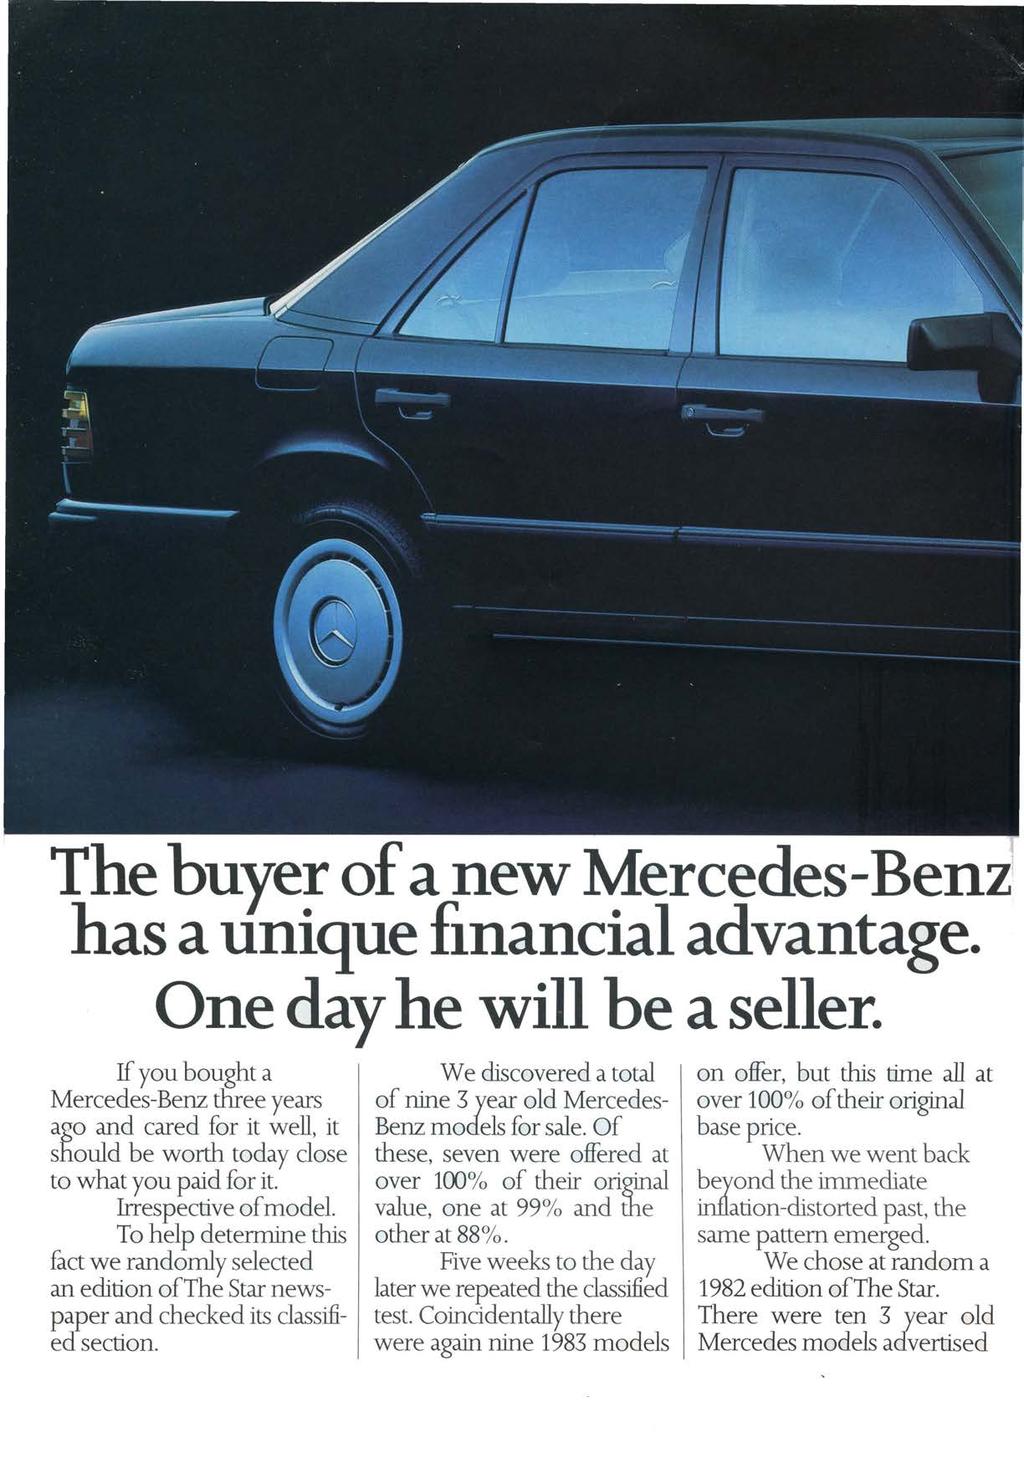 The buyer of a new Mercedes-Be has a unique financial advantage. One day he will be a seller.